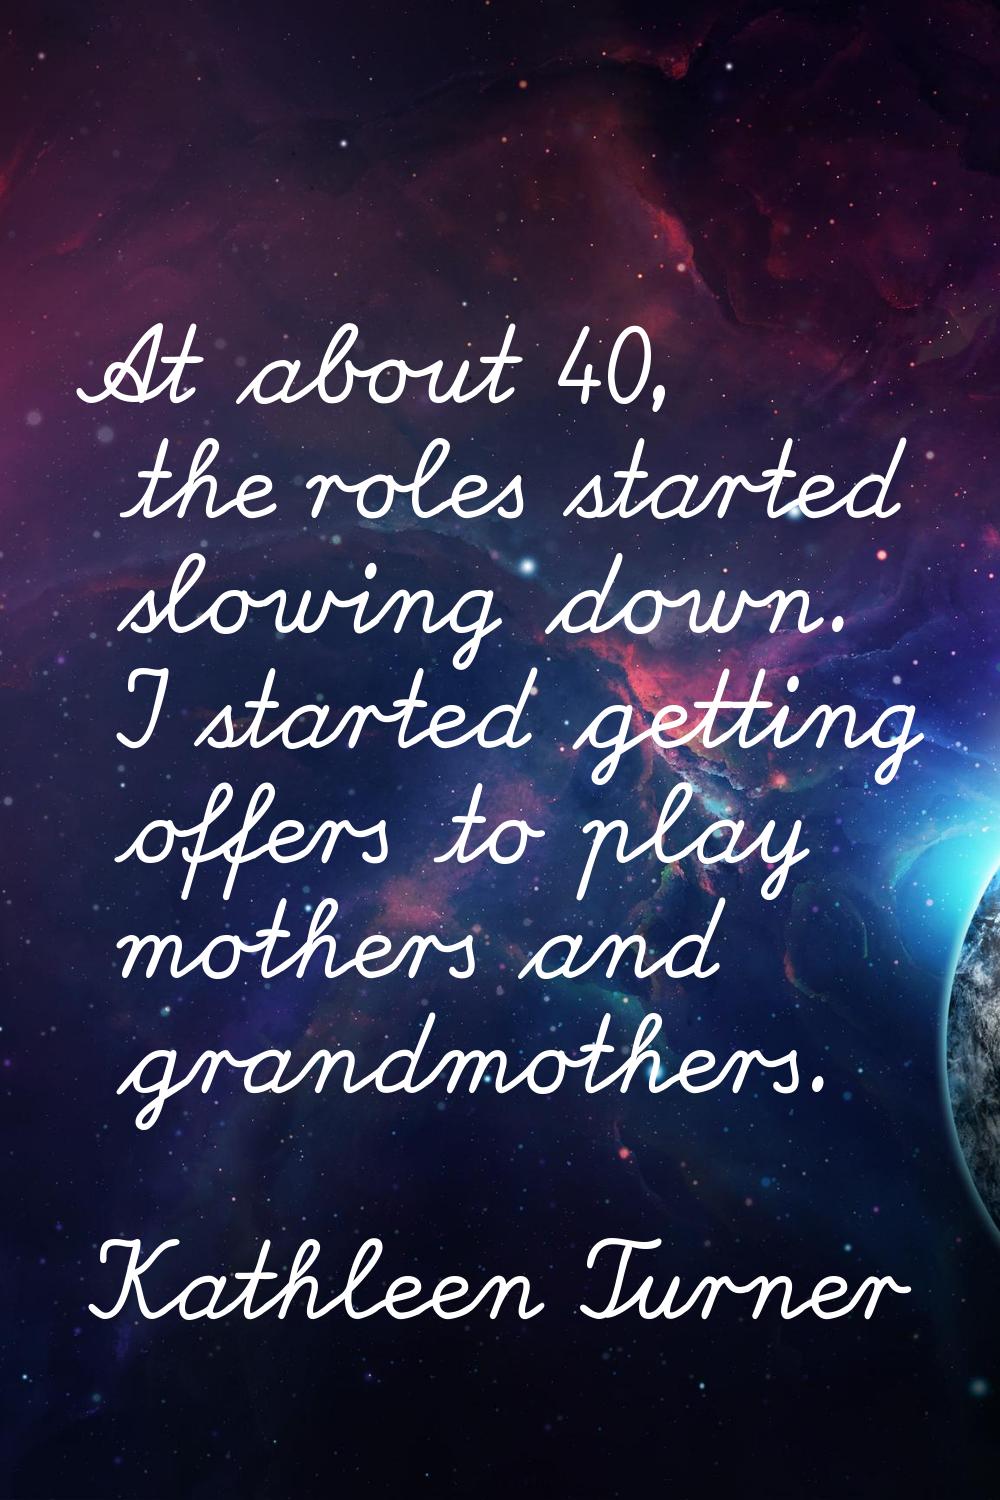 At about 40, the roles started slowing down. I started getting offers to play mothers and grandmoth